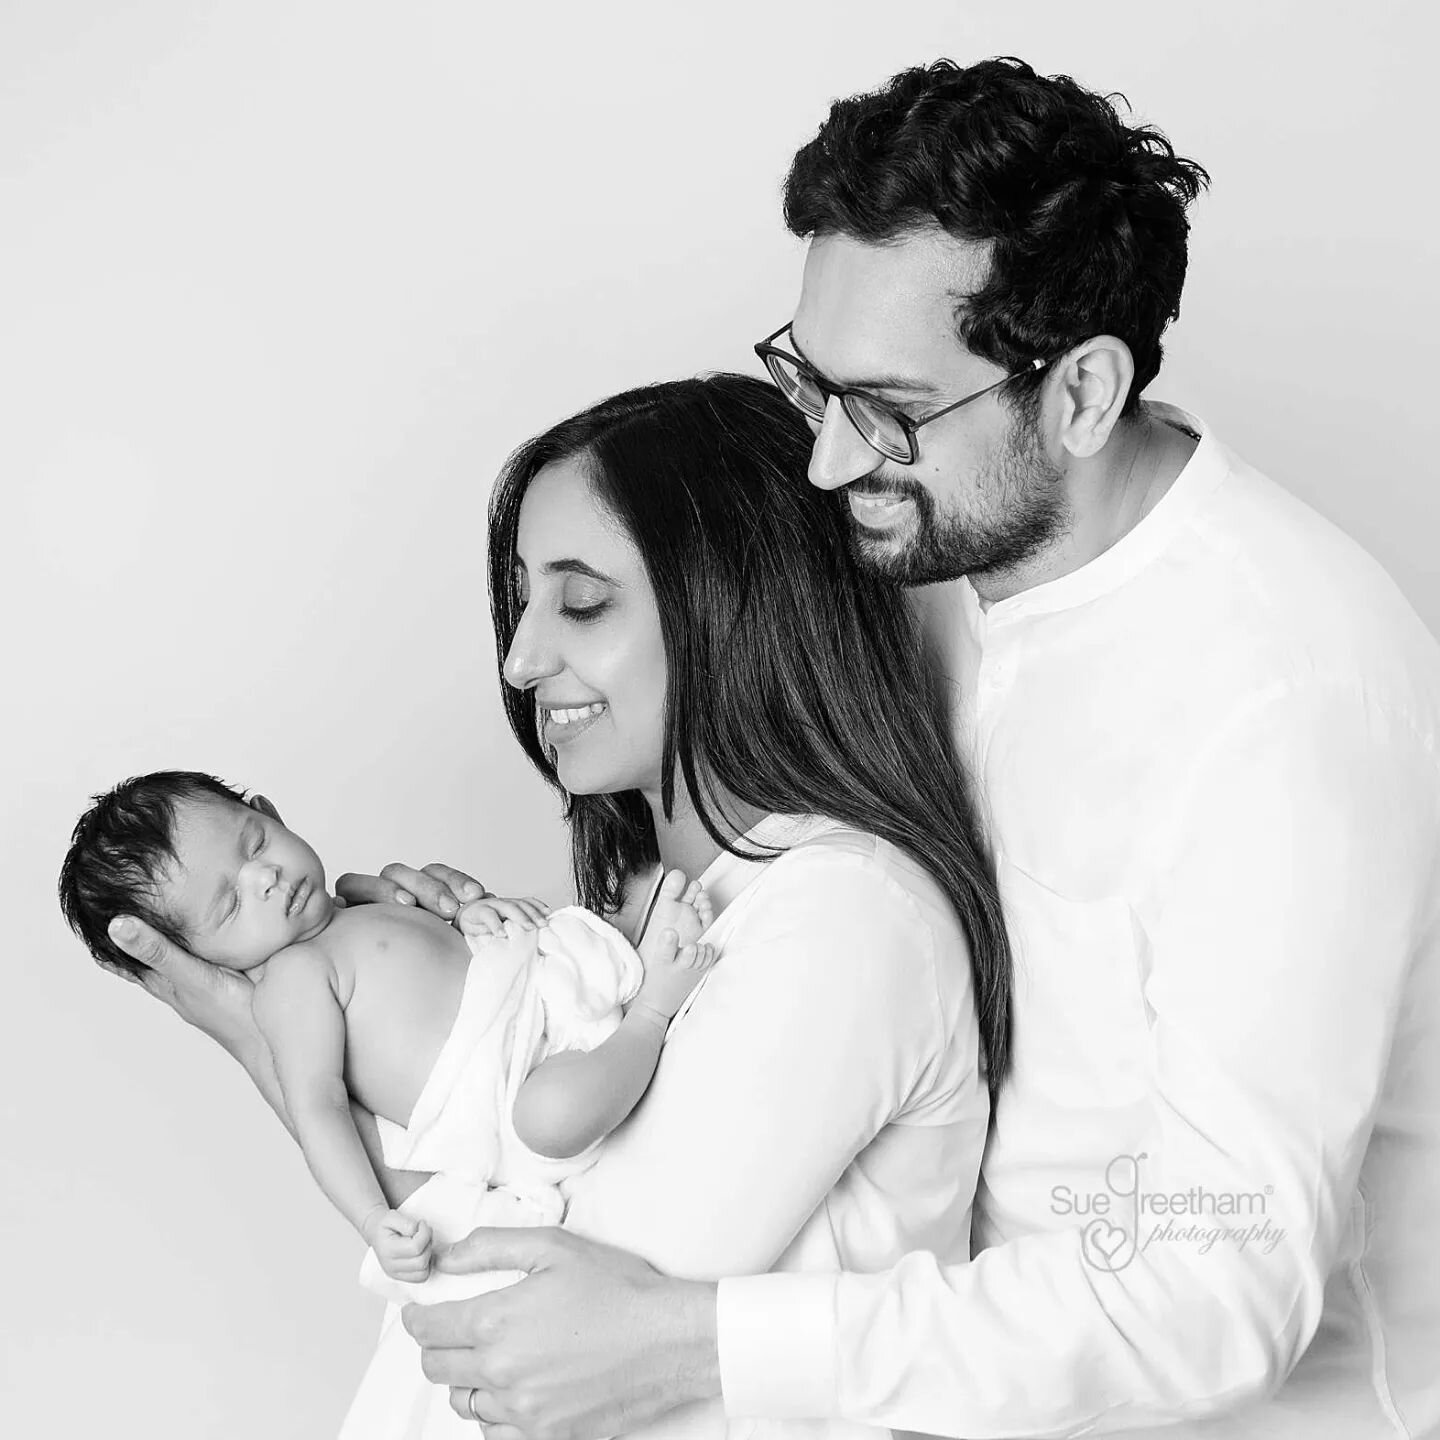 Your newborn shoot is more than just me taking photographs. 
It is a magical couple of hours where you can just be new parents in the peaceful cocoon of my studio as I gently capture some magic moments of your baby and you. 
DM me for more informatio